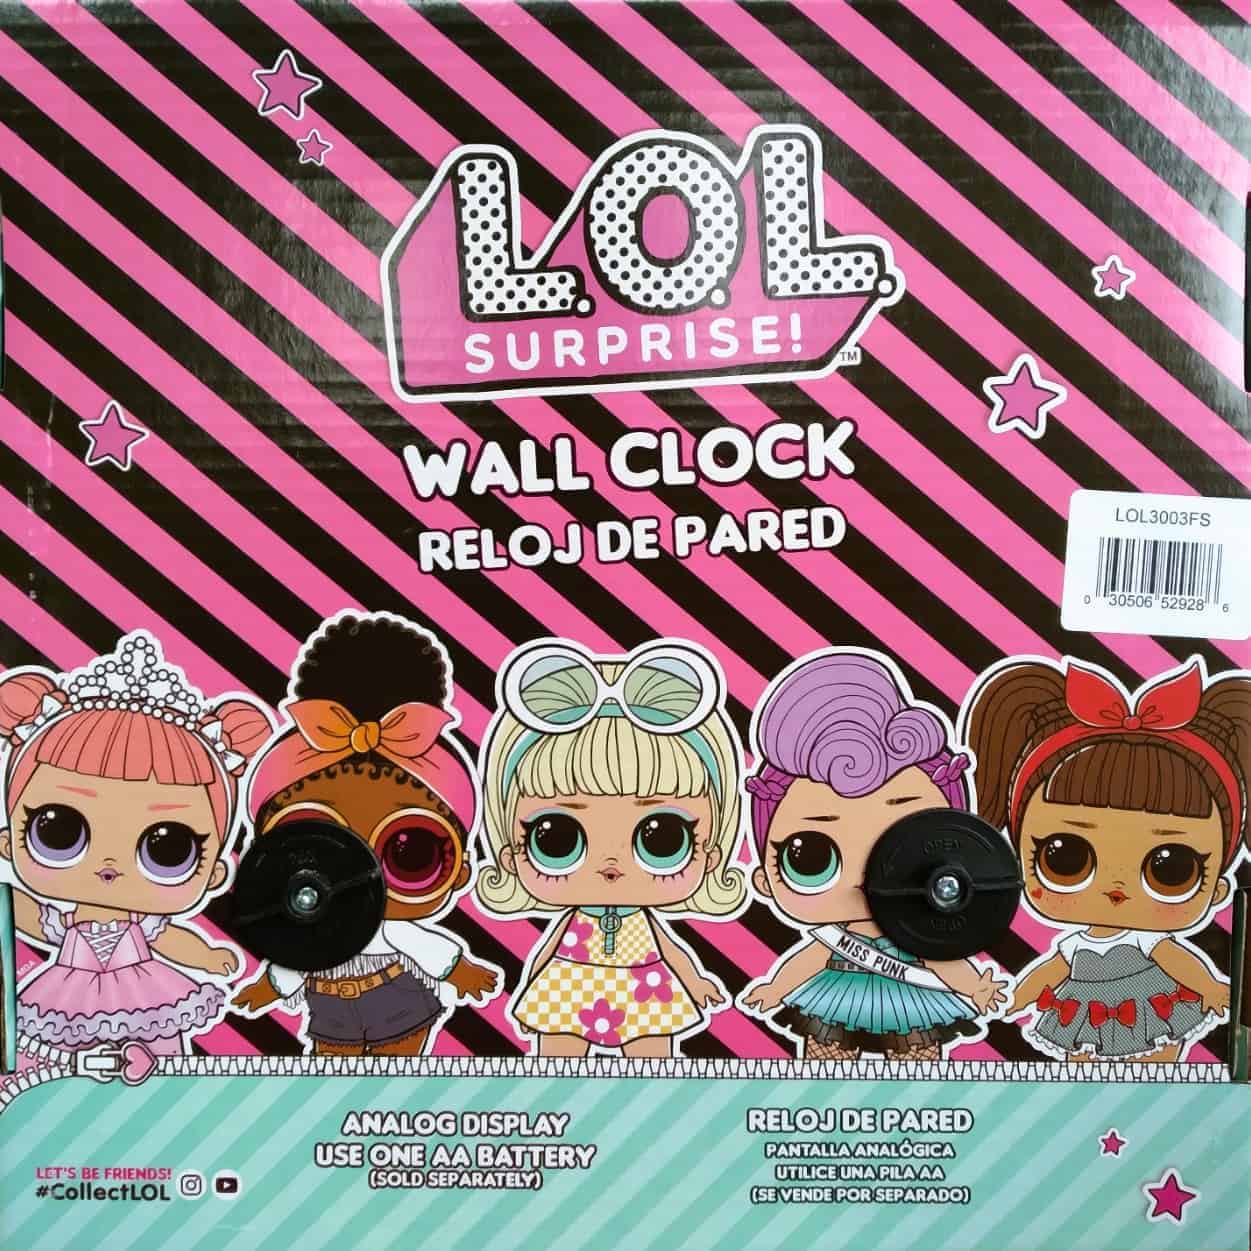 This LOL Surprise! Wall Clock- Pink Analog Wall Clock 9 3/4 Inches is made with love by Premier Homegoods! Shop more unique gift ideas today with Spots Initiatives, the best way to support creators.